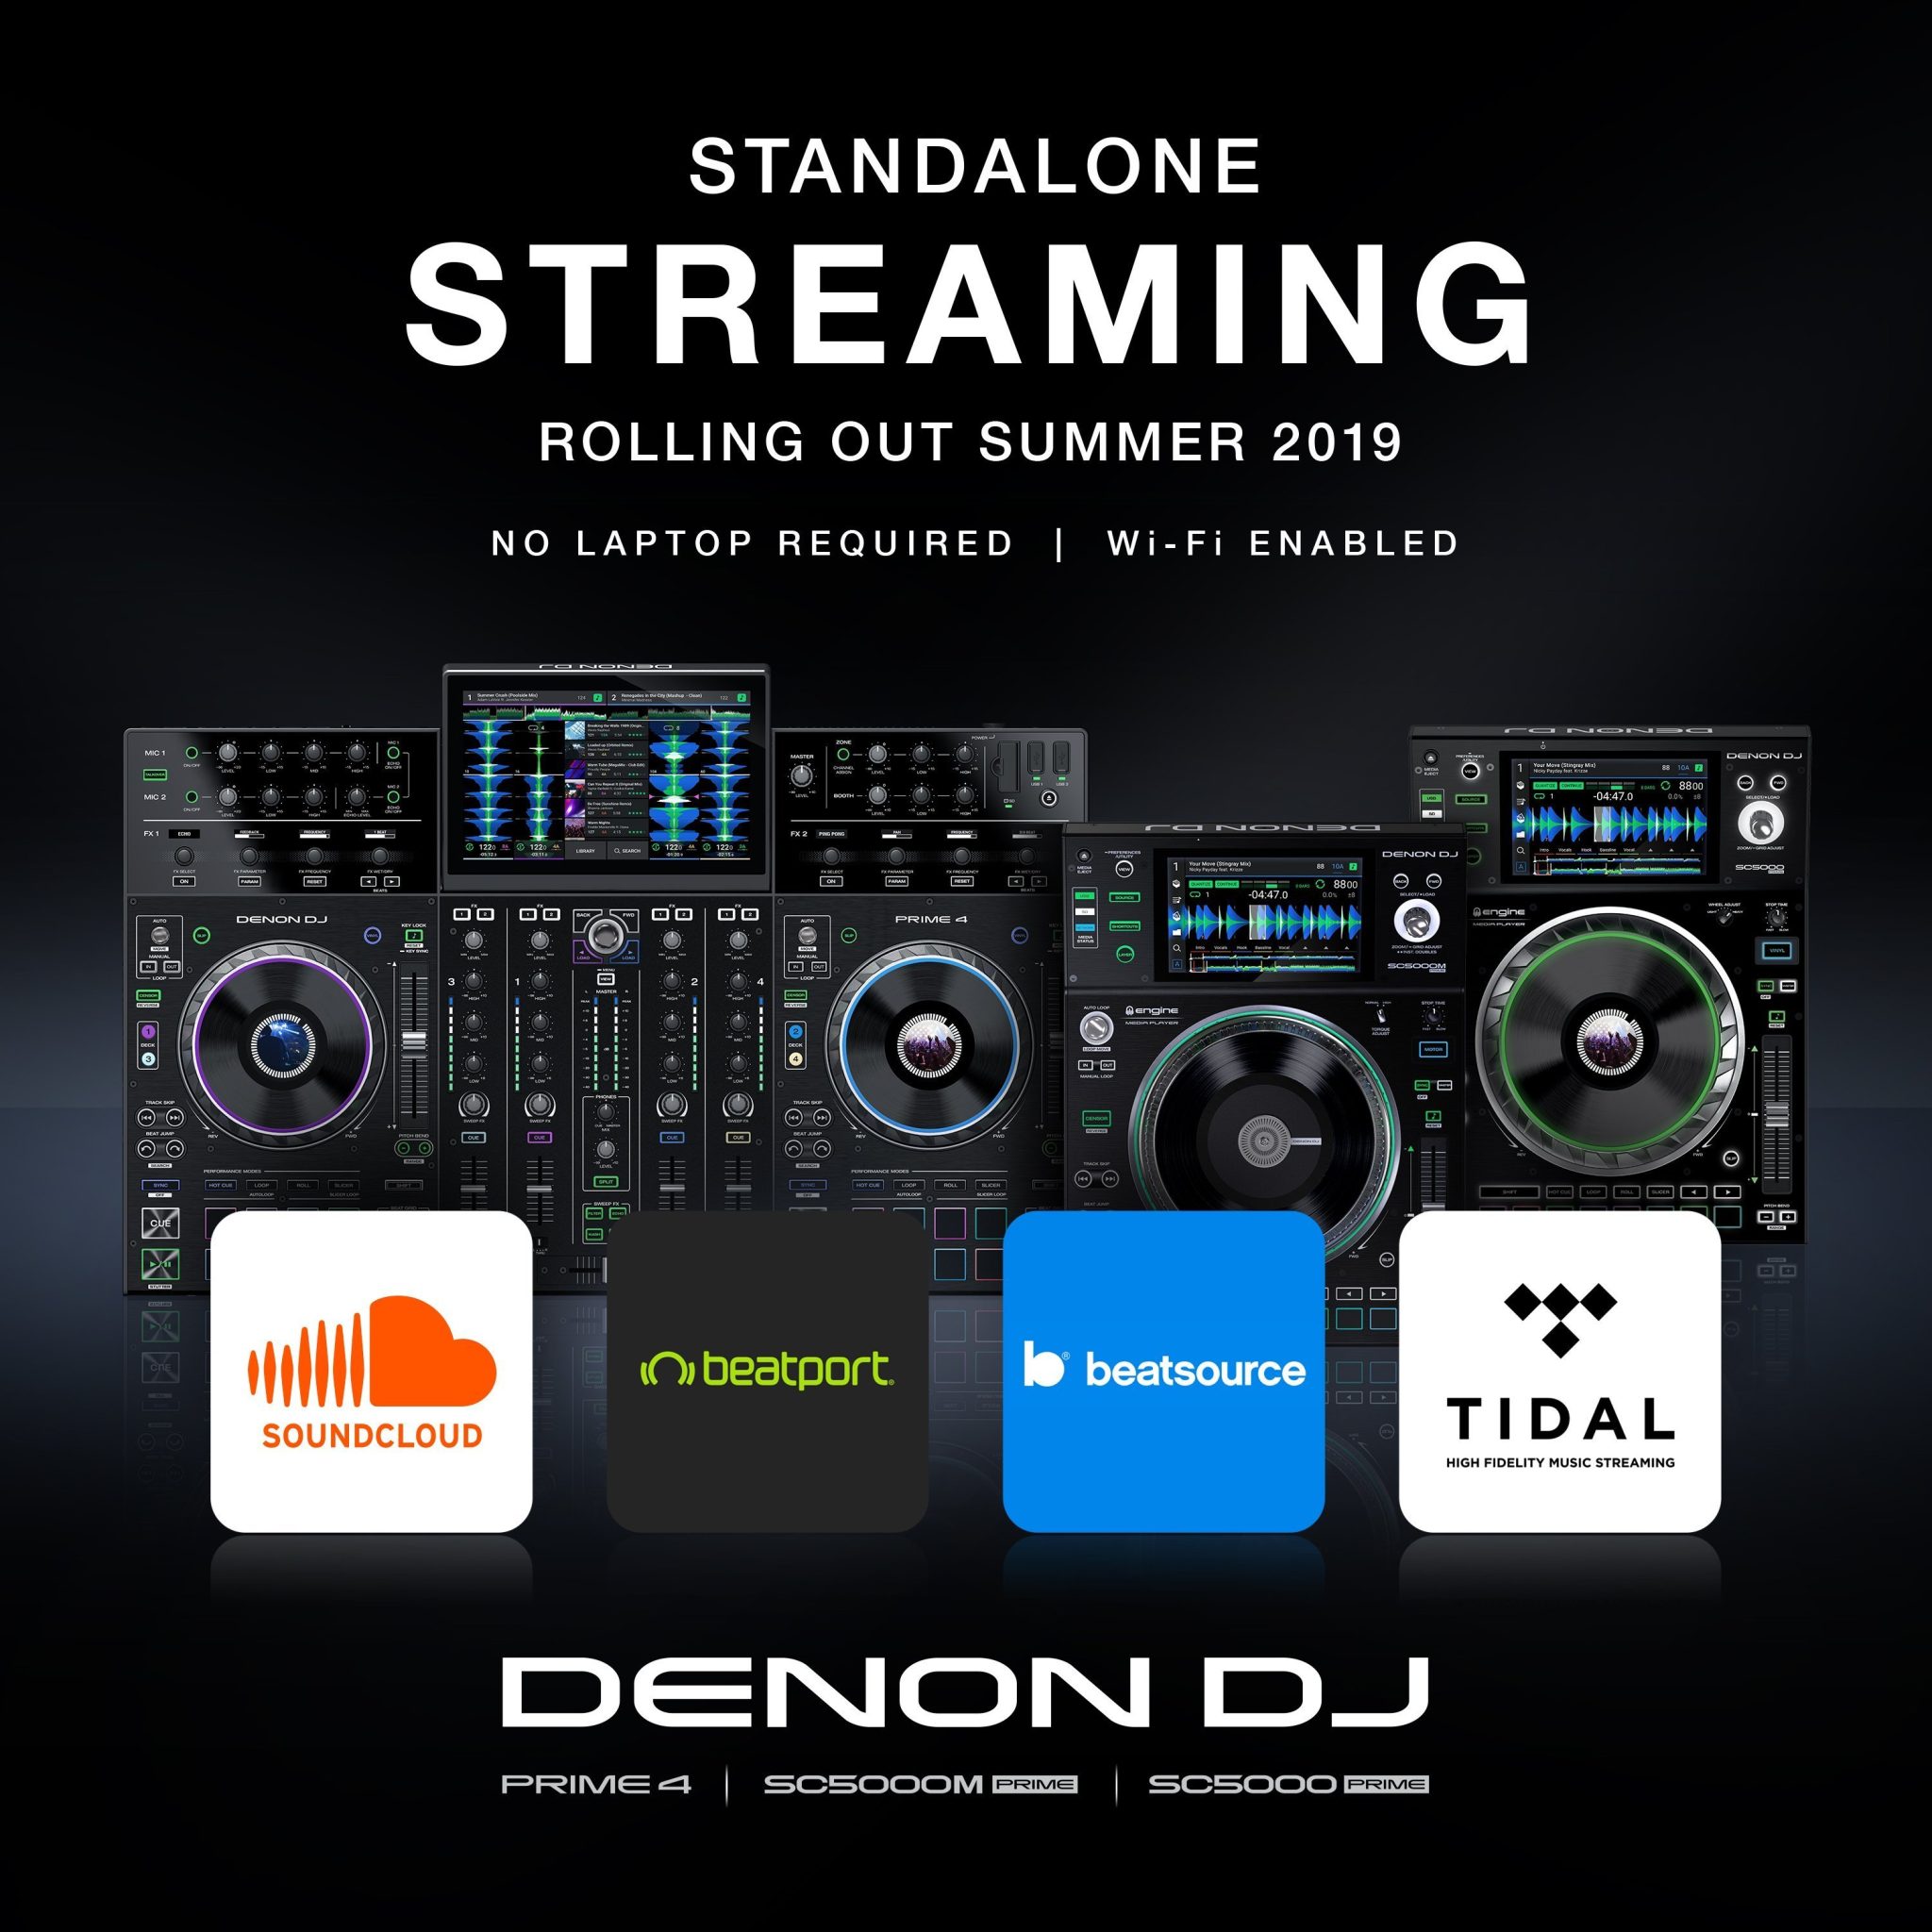 Denon DJ's secret standalone streaming has been here all the time